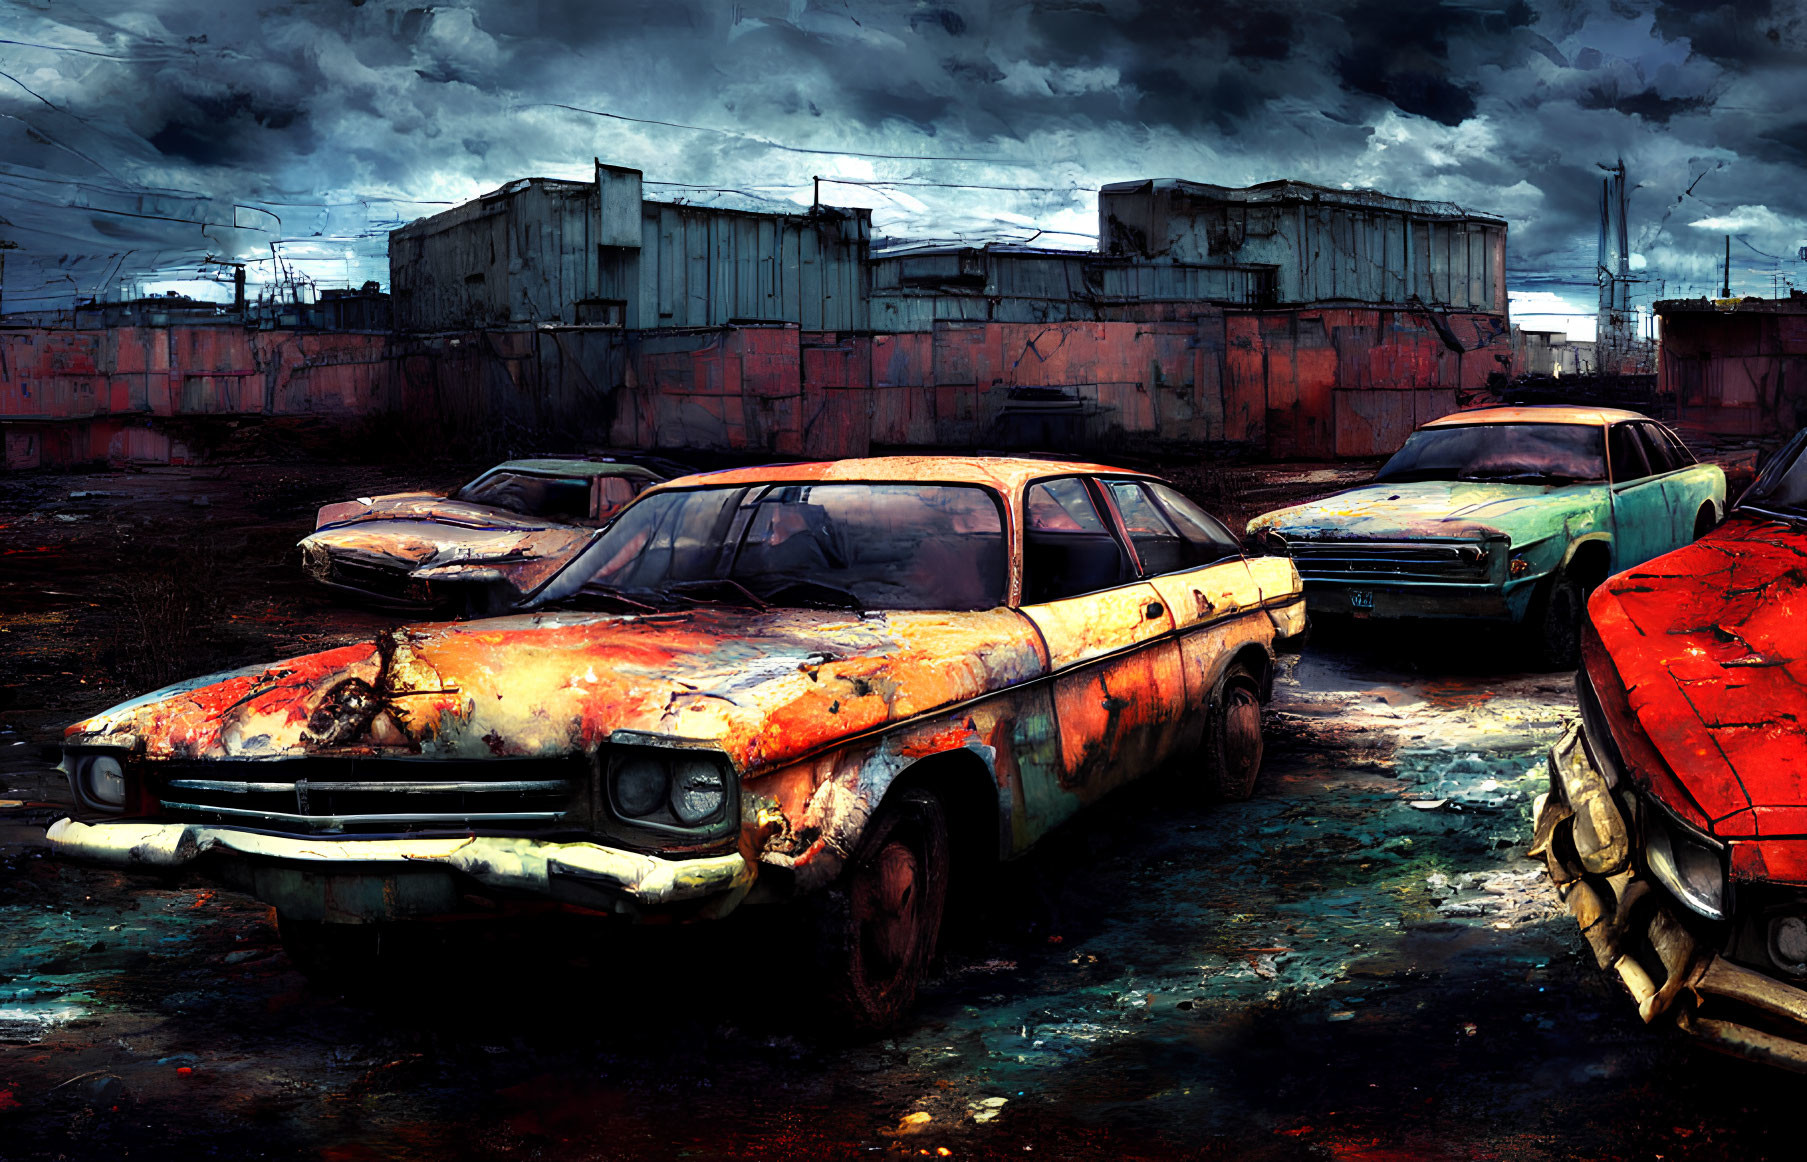 Abandoned rusty cars in stormy wasteland with dilapidated buildings